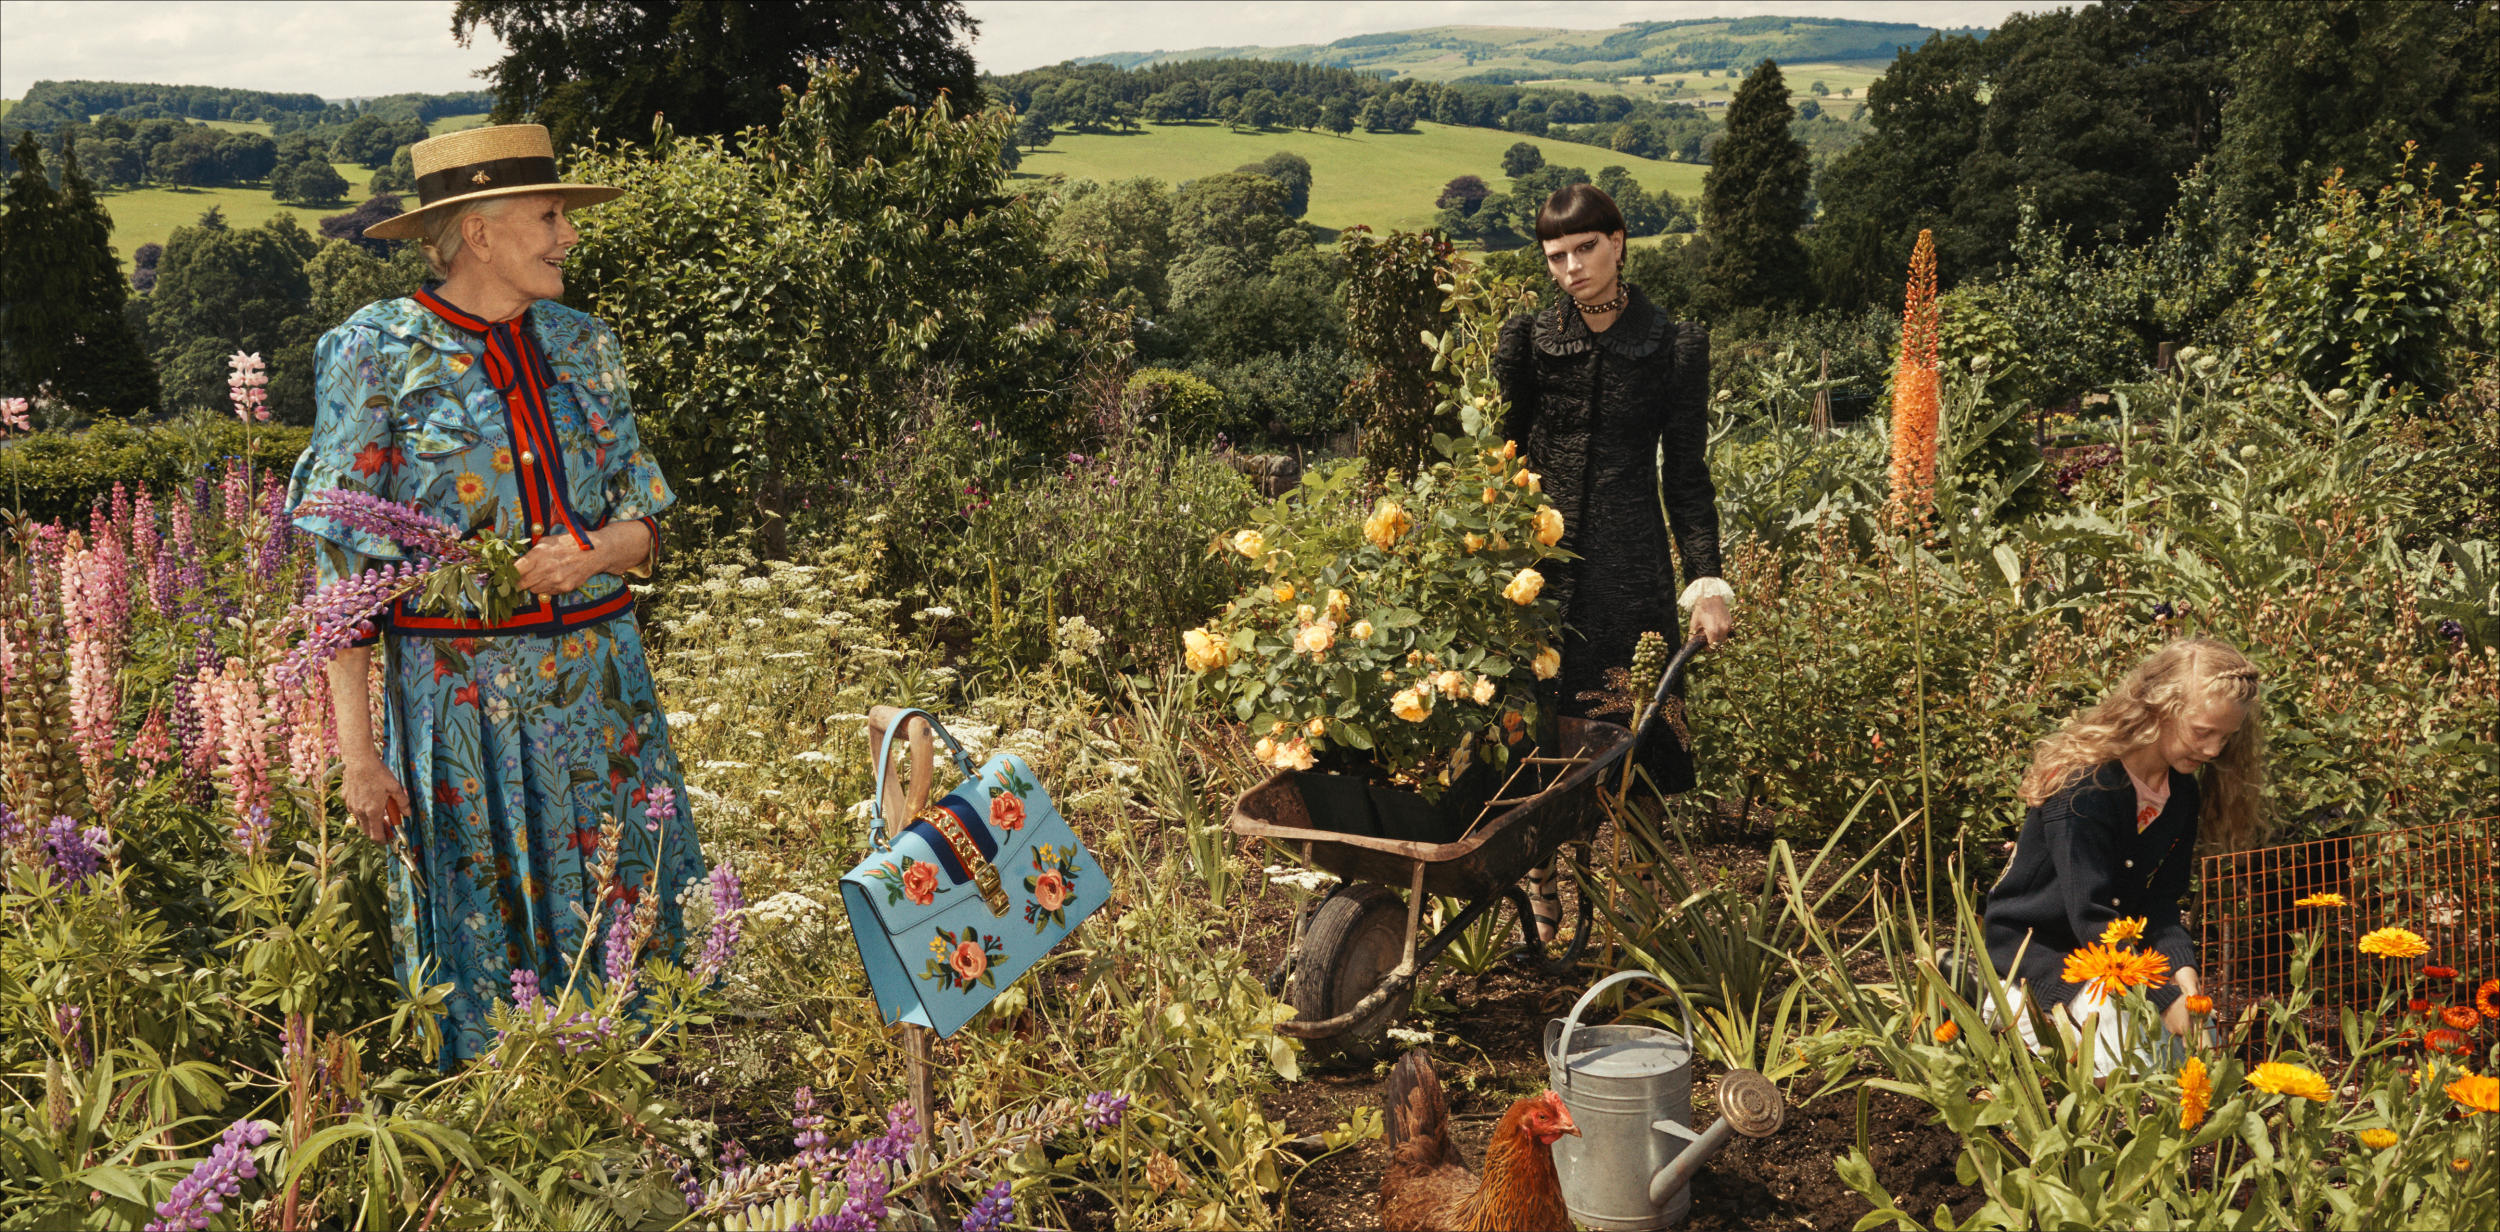 gucci on X: #GucciSummerStories celebrate the spirit of travel and  exploration with a vibrant selection for the new season. Discover more   Art Direction: #KevinTekinel & #CharlesLevai  Director and photographer: #HarleyWeir